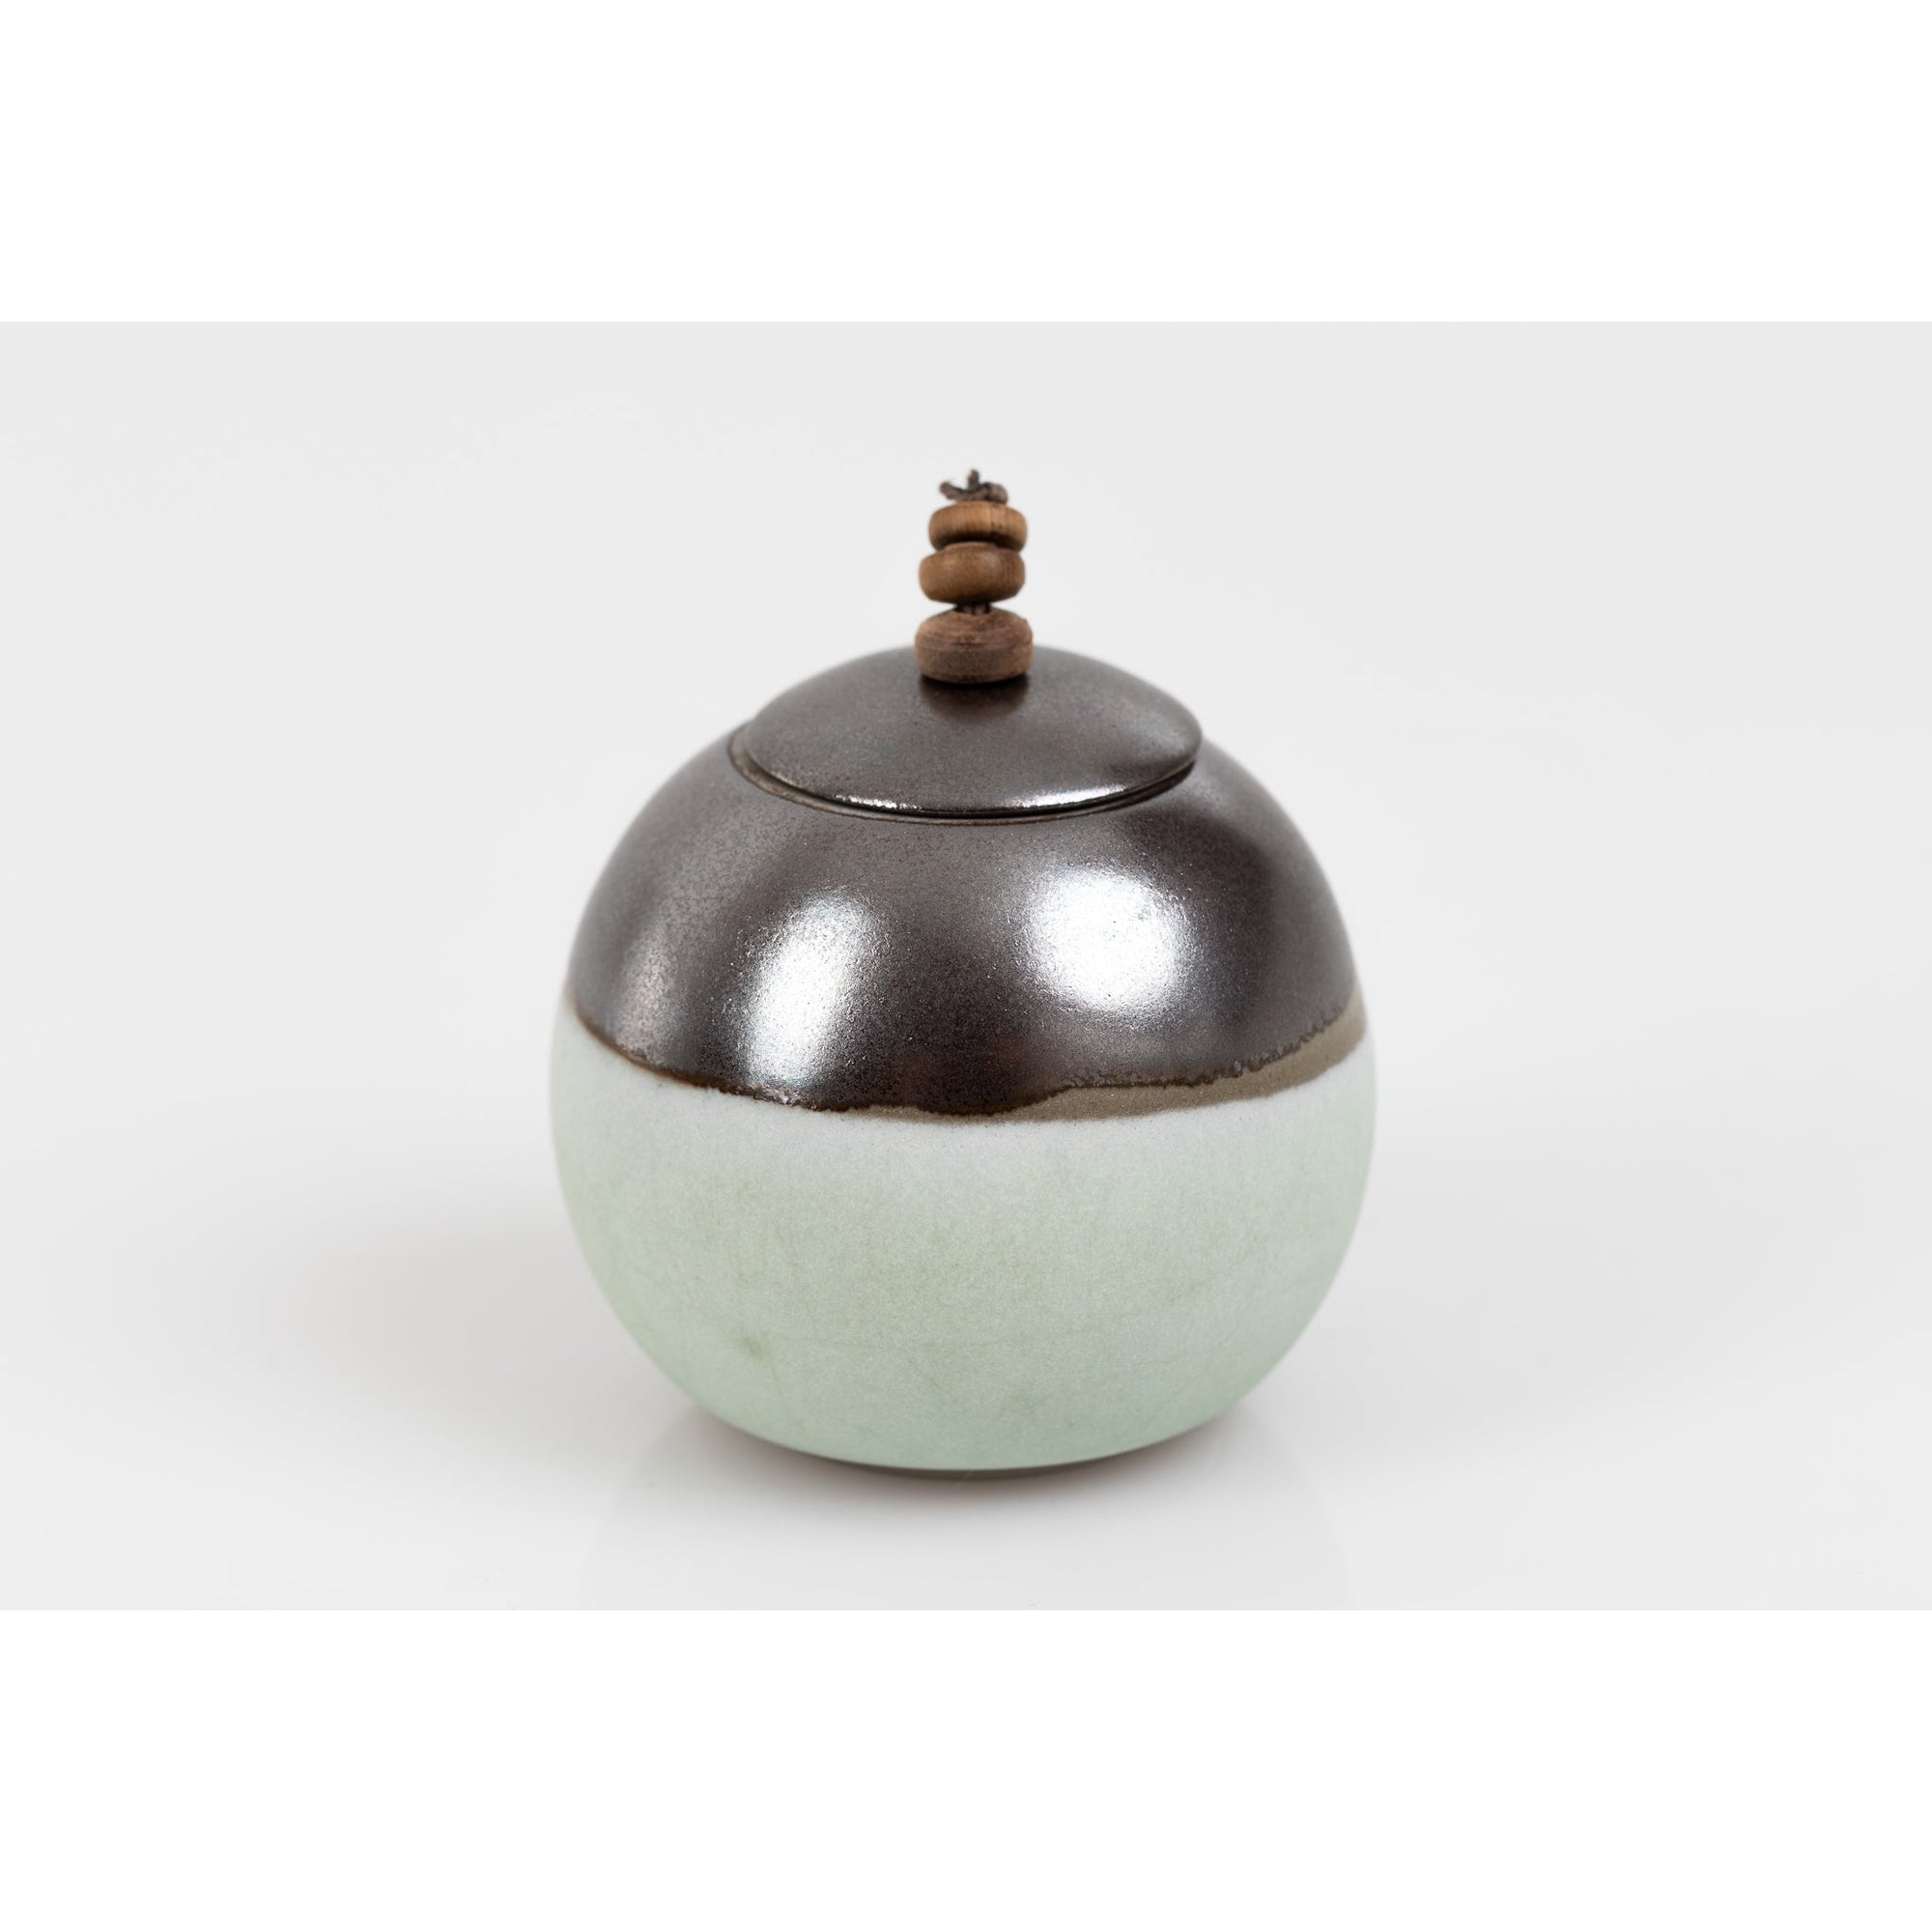 KSH2 Lunar, Stoneware Sphere Pot by Kate Schuricht, available at Padstow Gallery, Cornwall